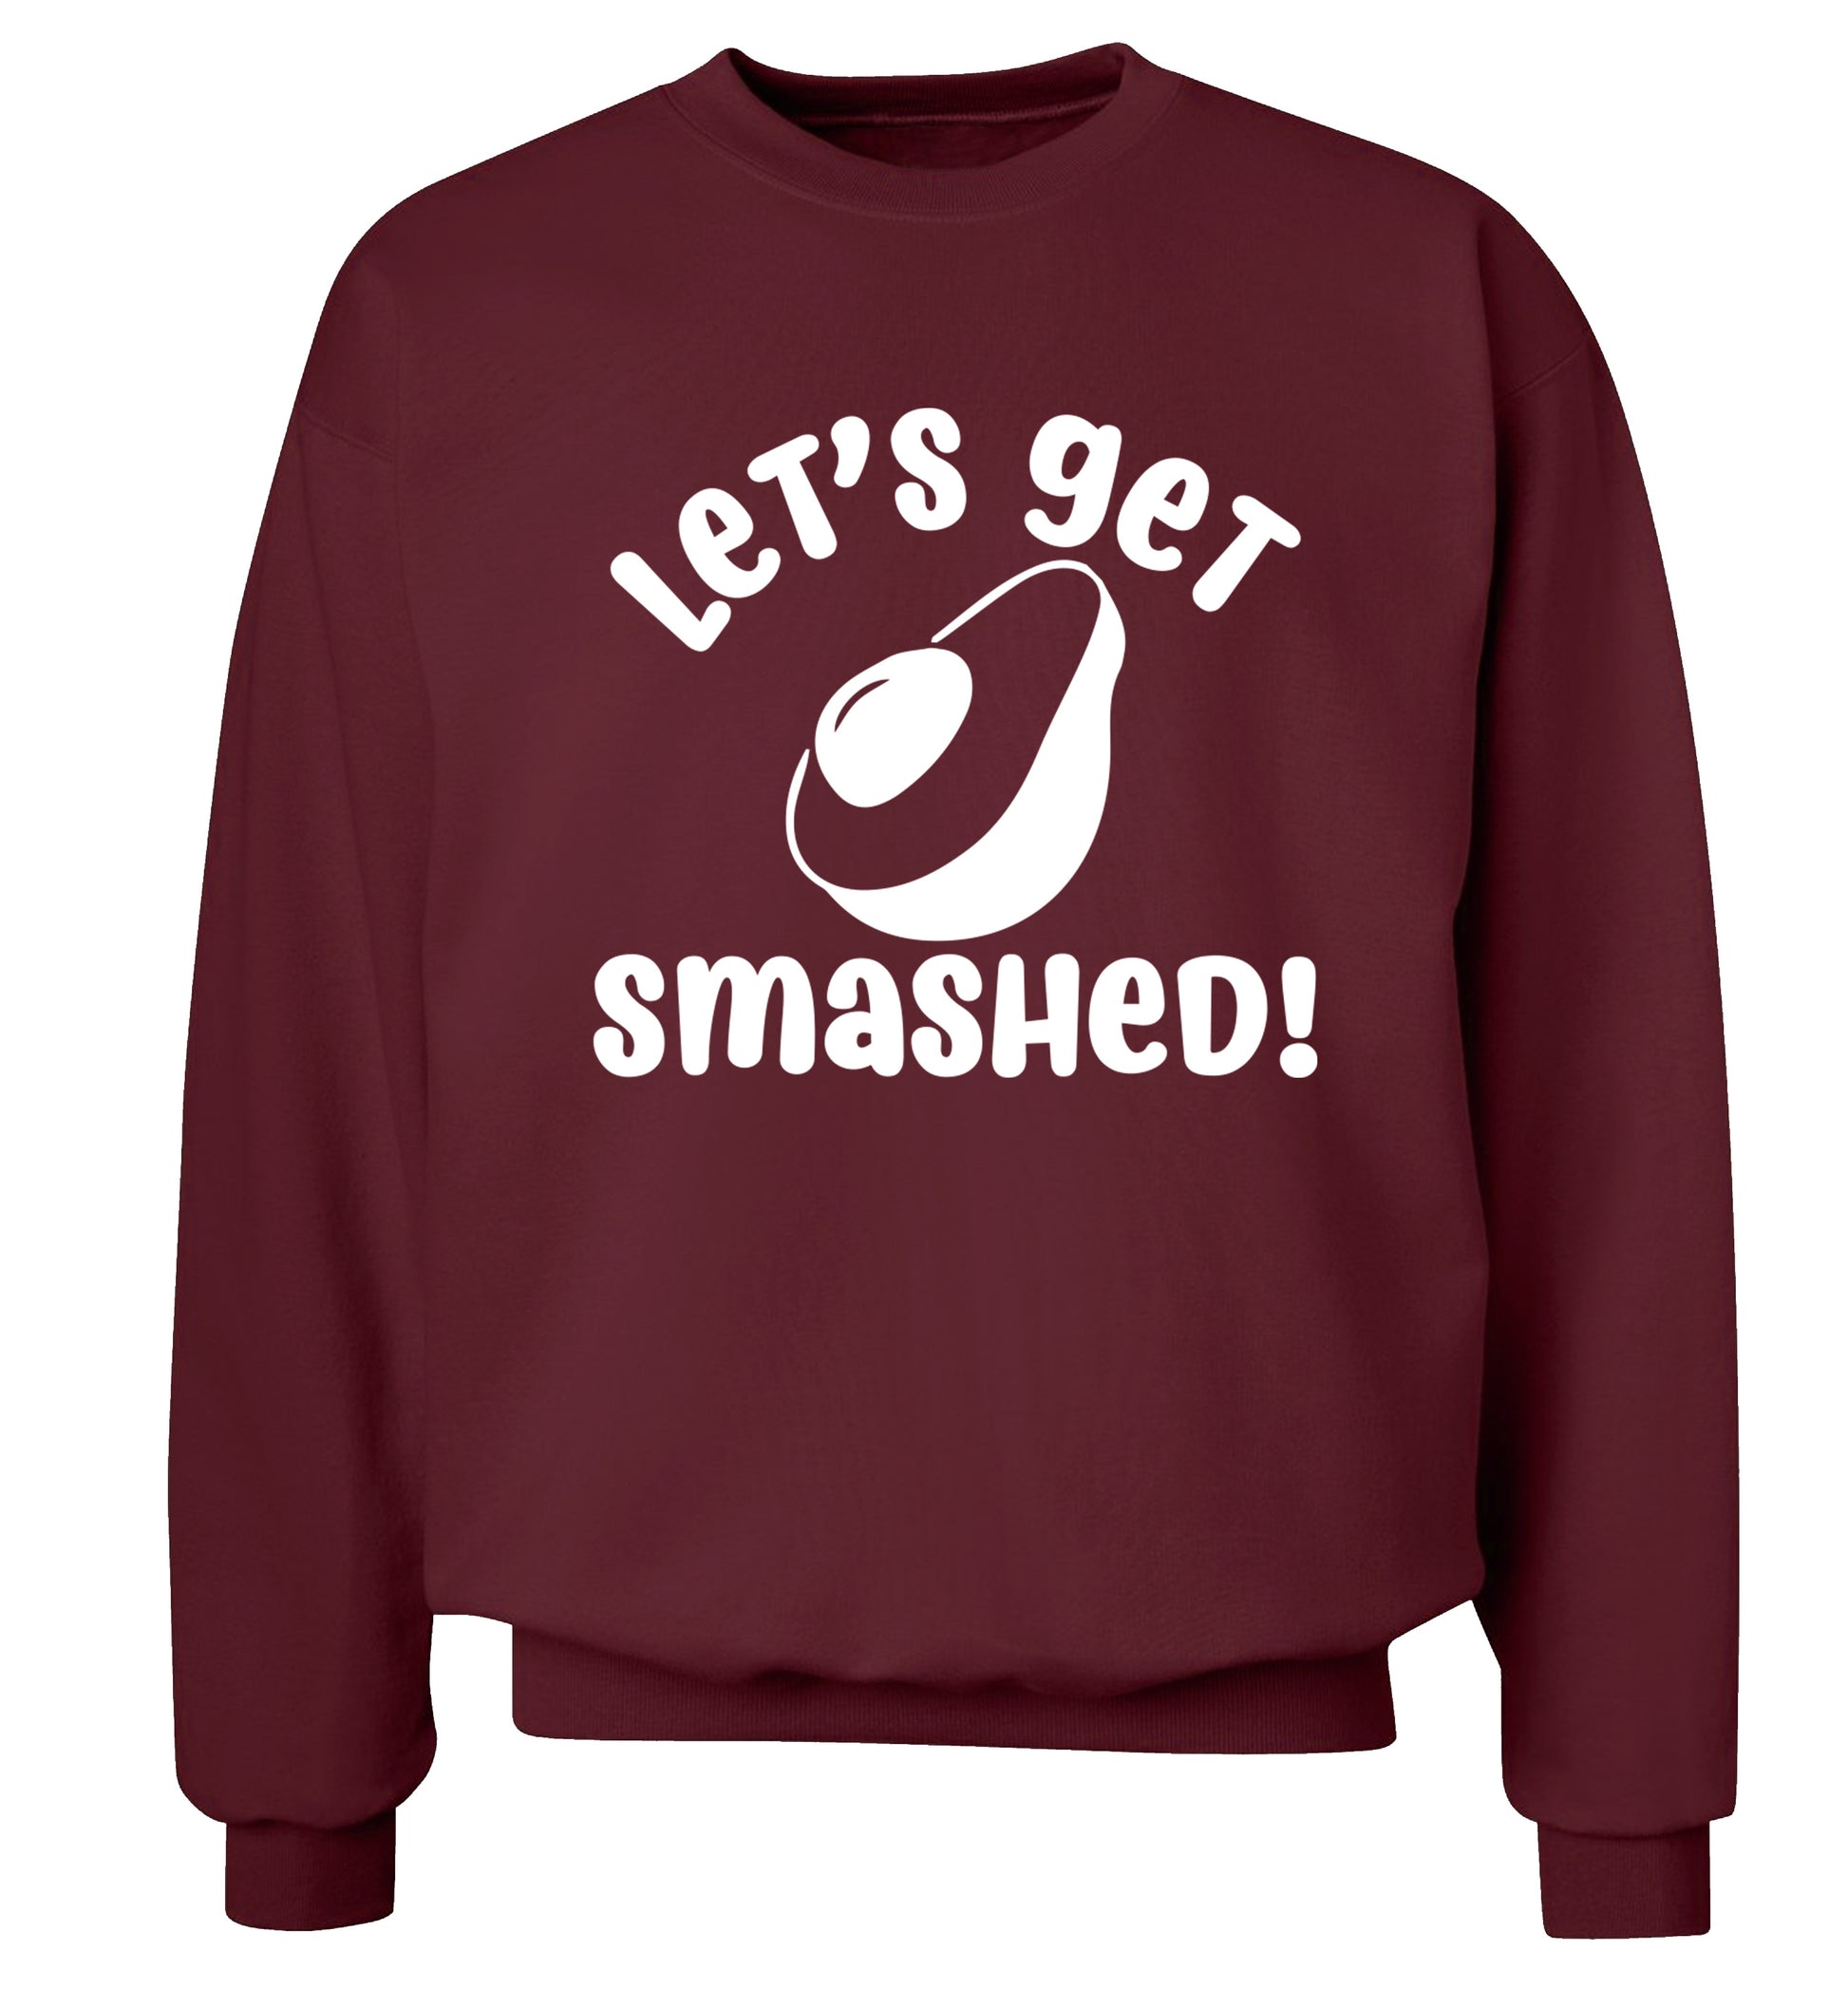 Let's get smashed Adult's unisex maroon Sweater 2XL